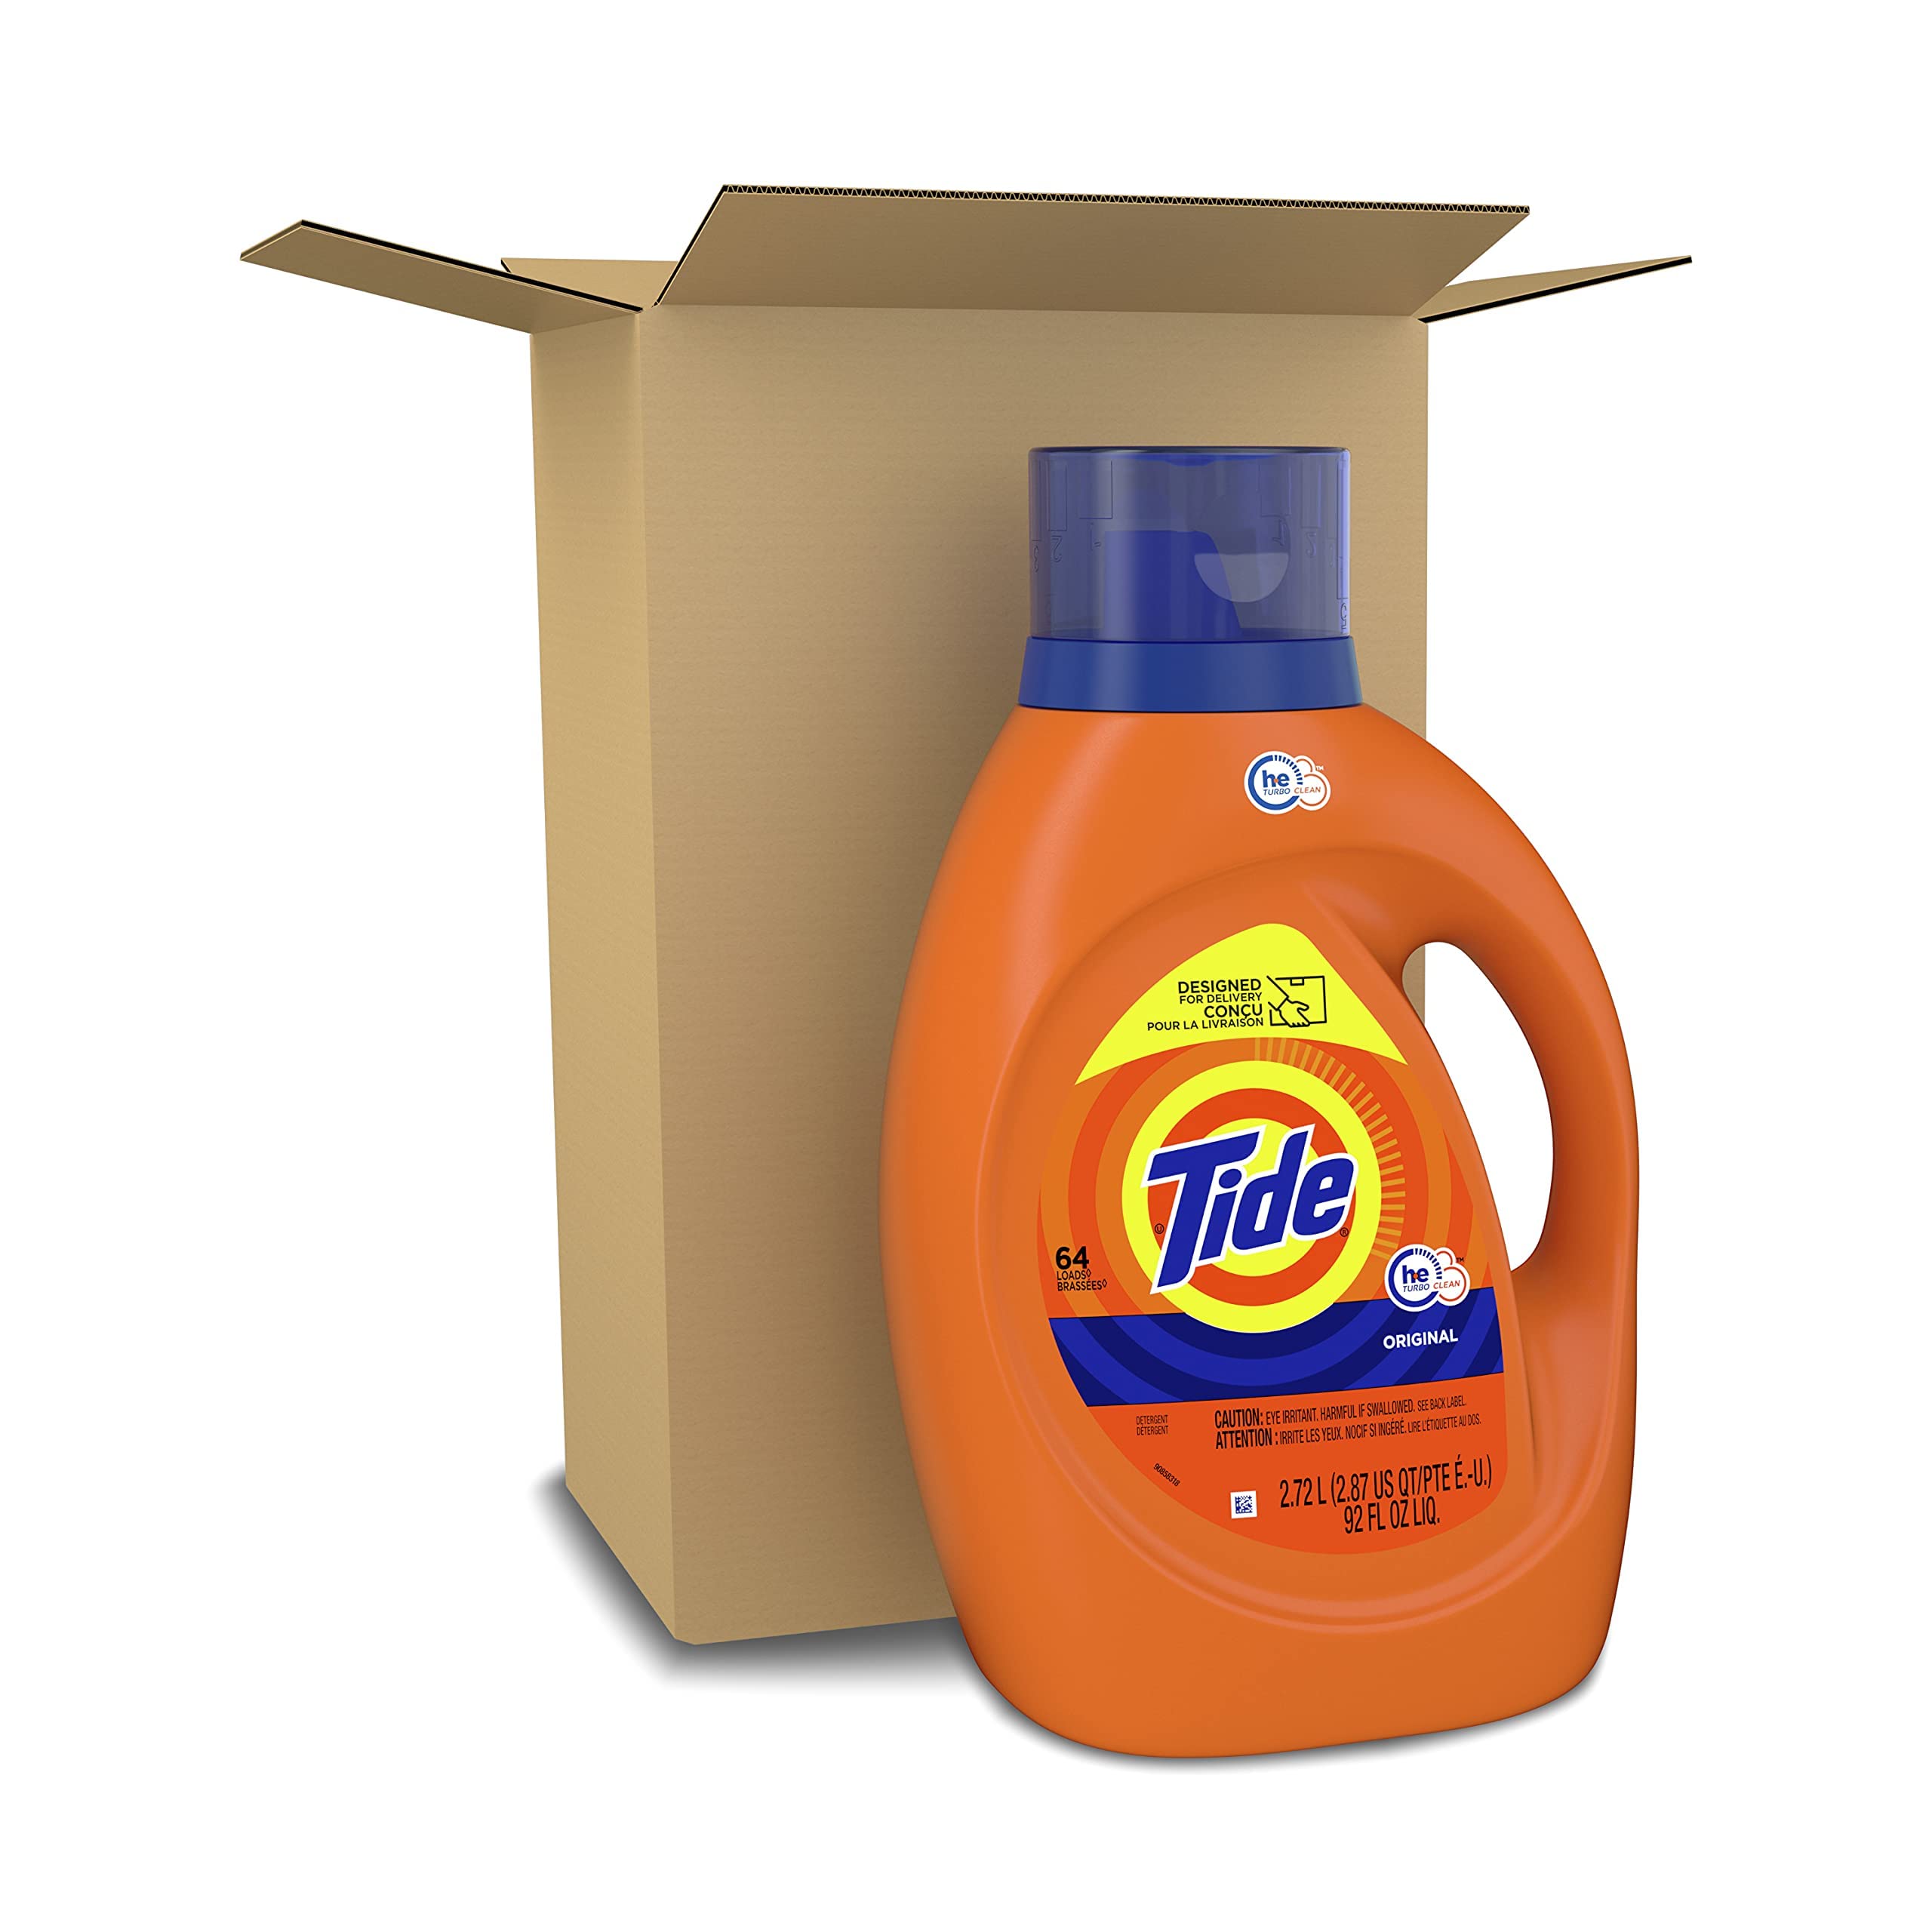 Amazon Tide Laundry Detergent Liquid Soap, High Efficiency (He), Original Scent, 64 Loads $7.40 or less with S&S and Coupon